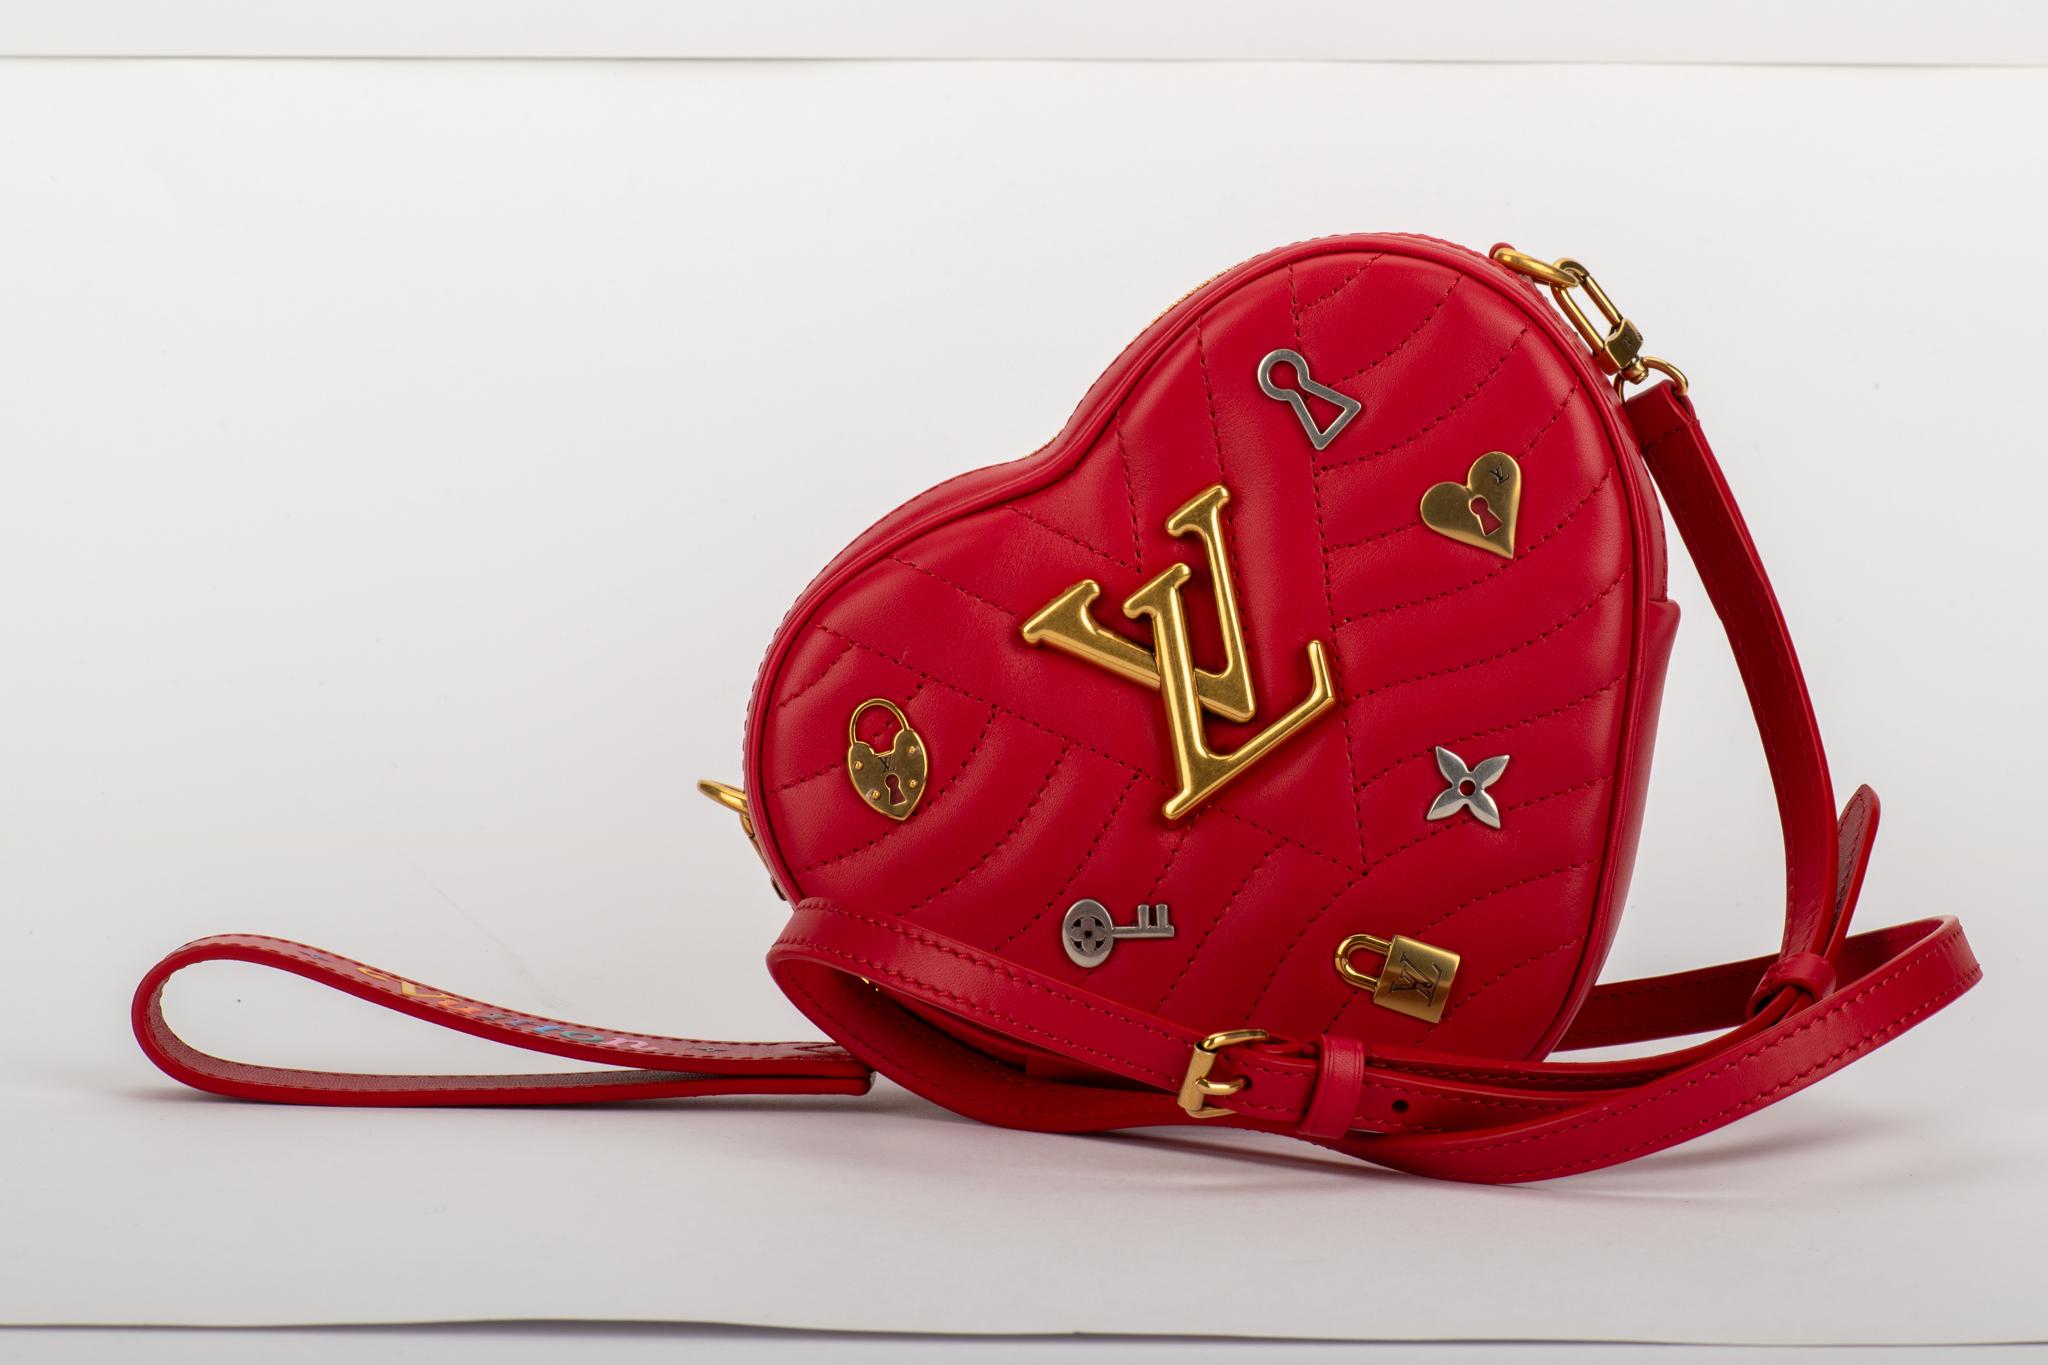 New in Box Vuitton Limited Edition Red Heart Charm Handbag Clutch Belt Bag For Sale 1